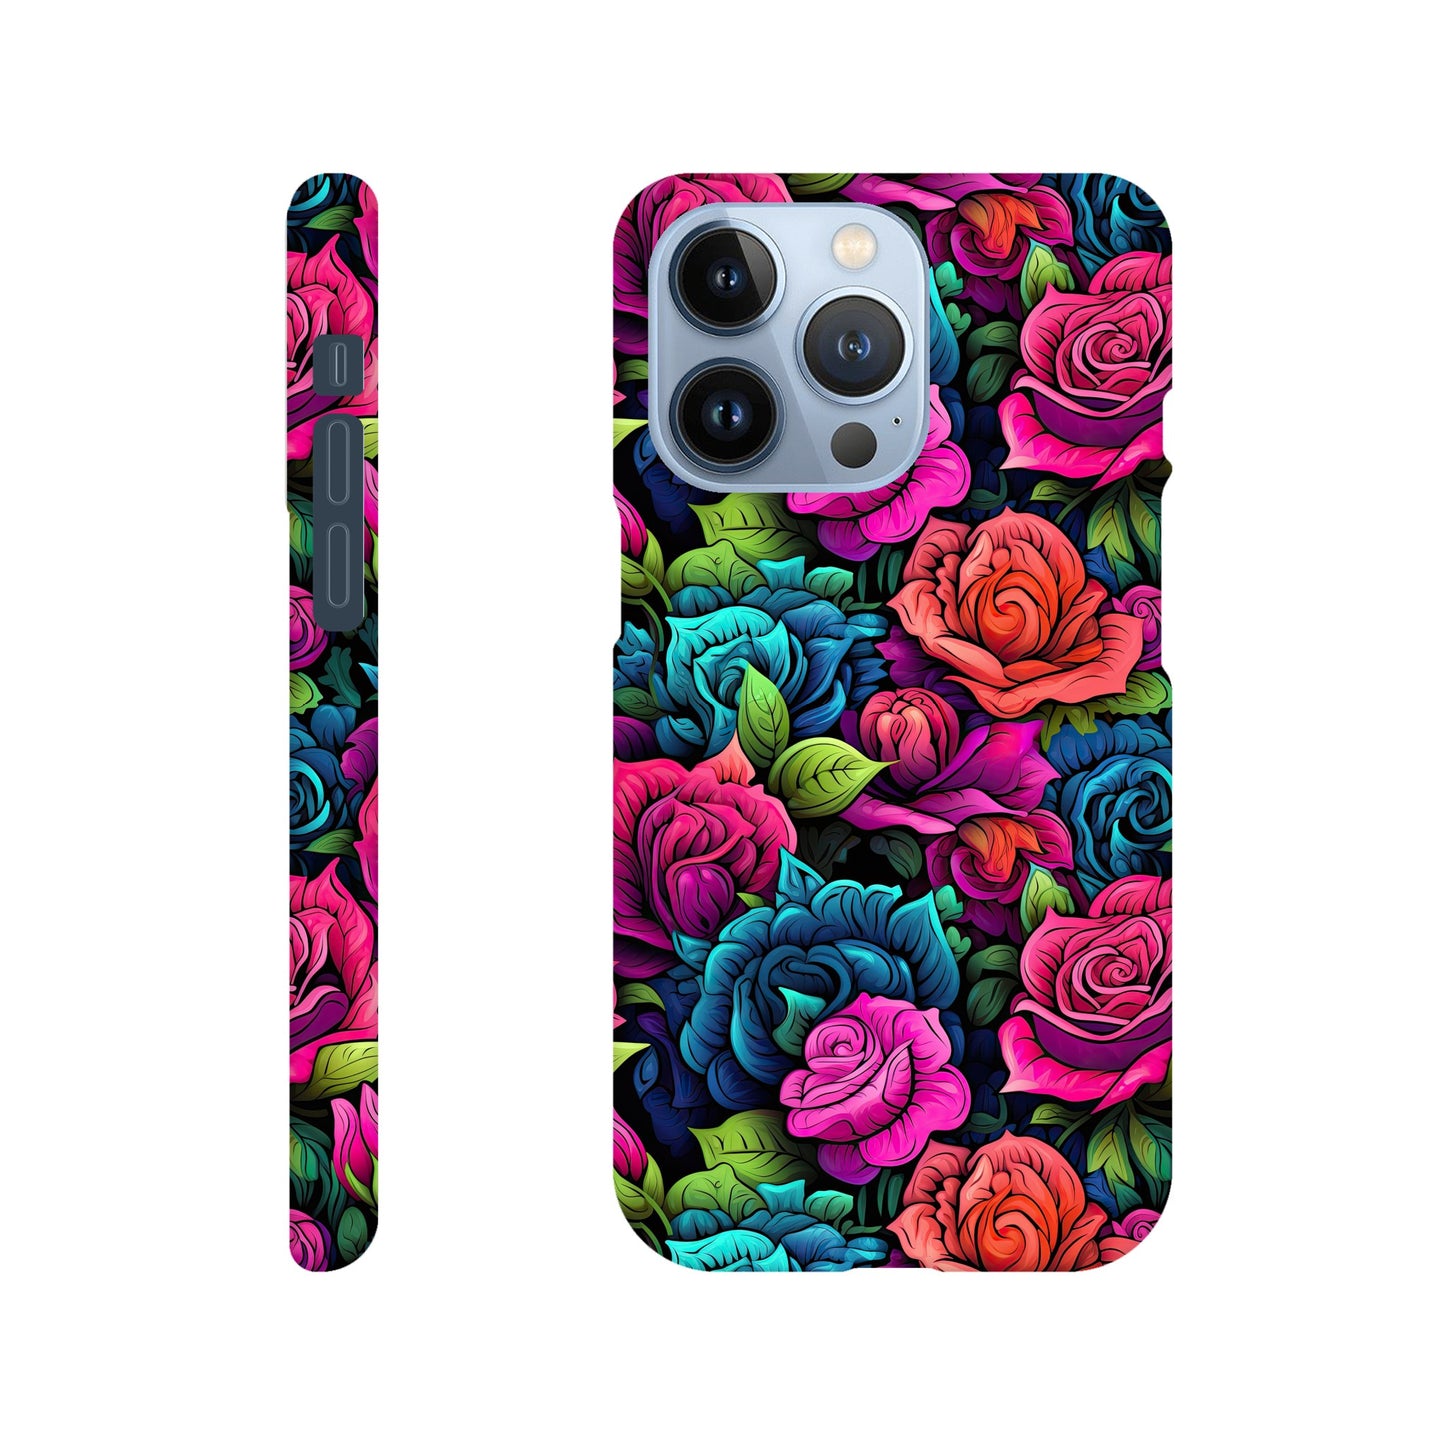 slim phone case with colorful roses all over print